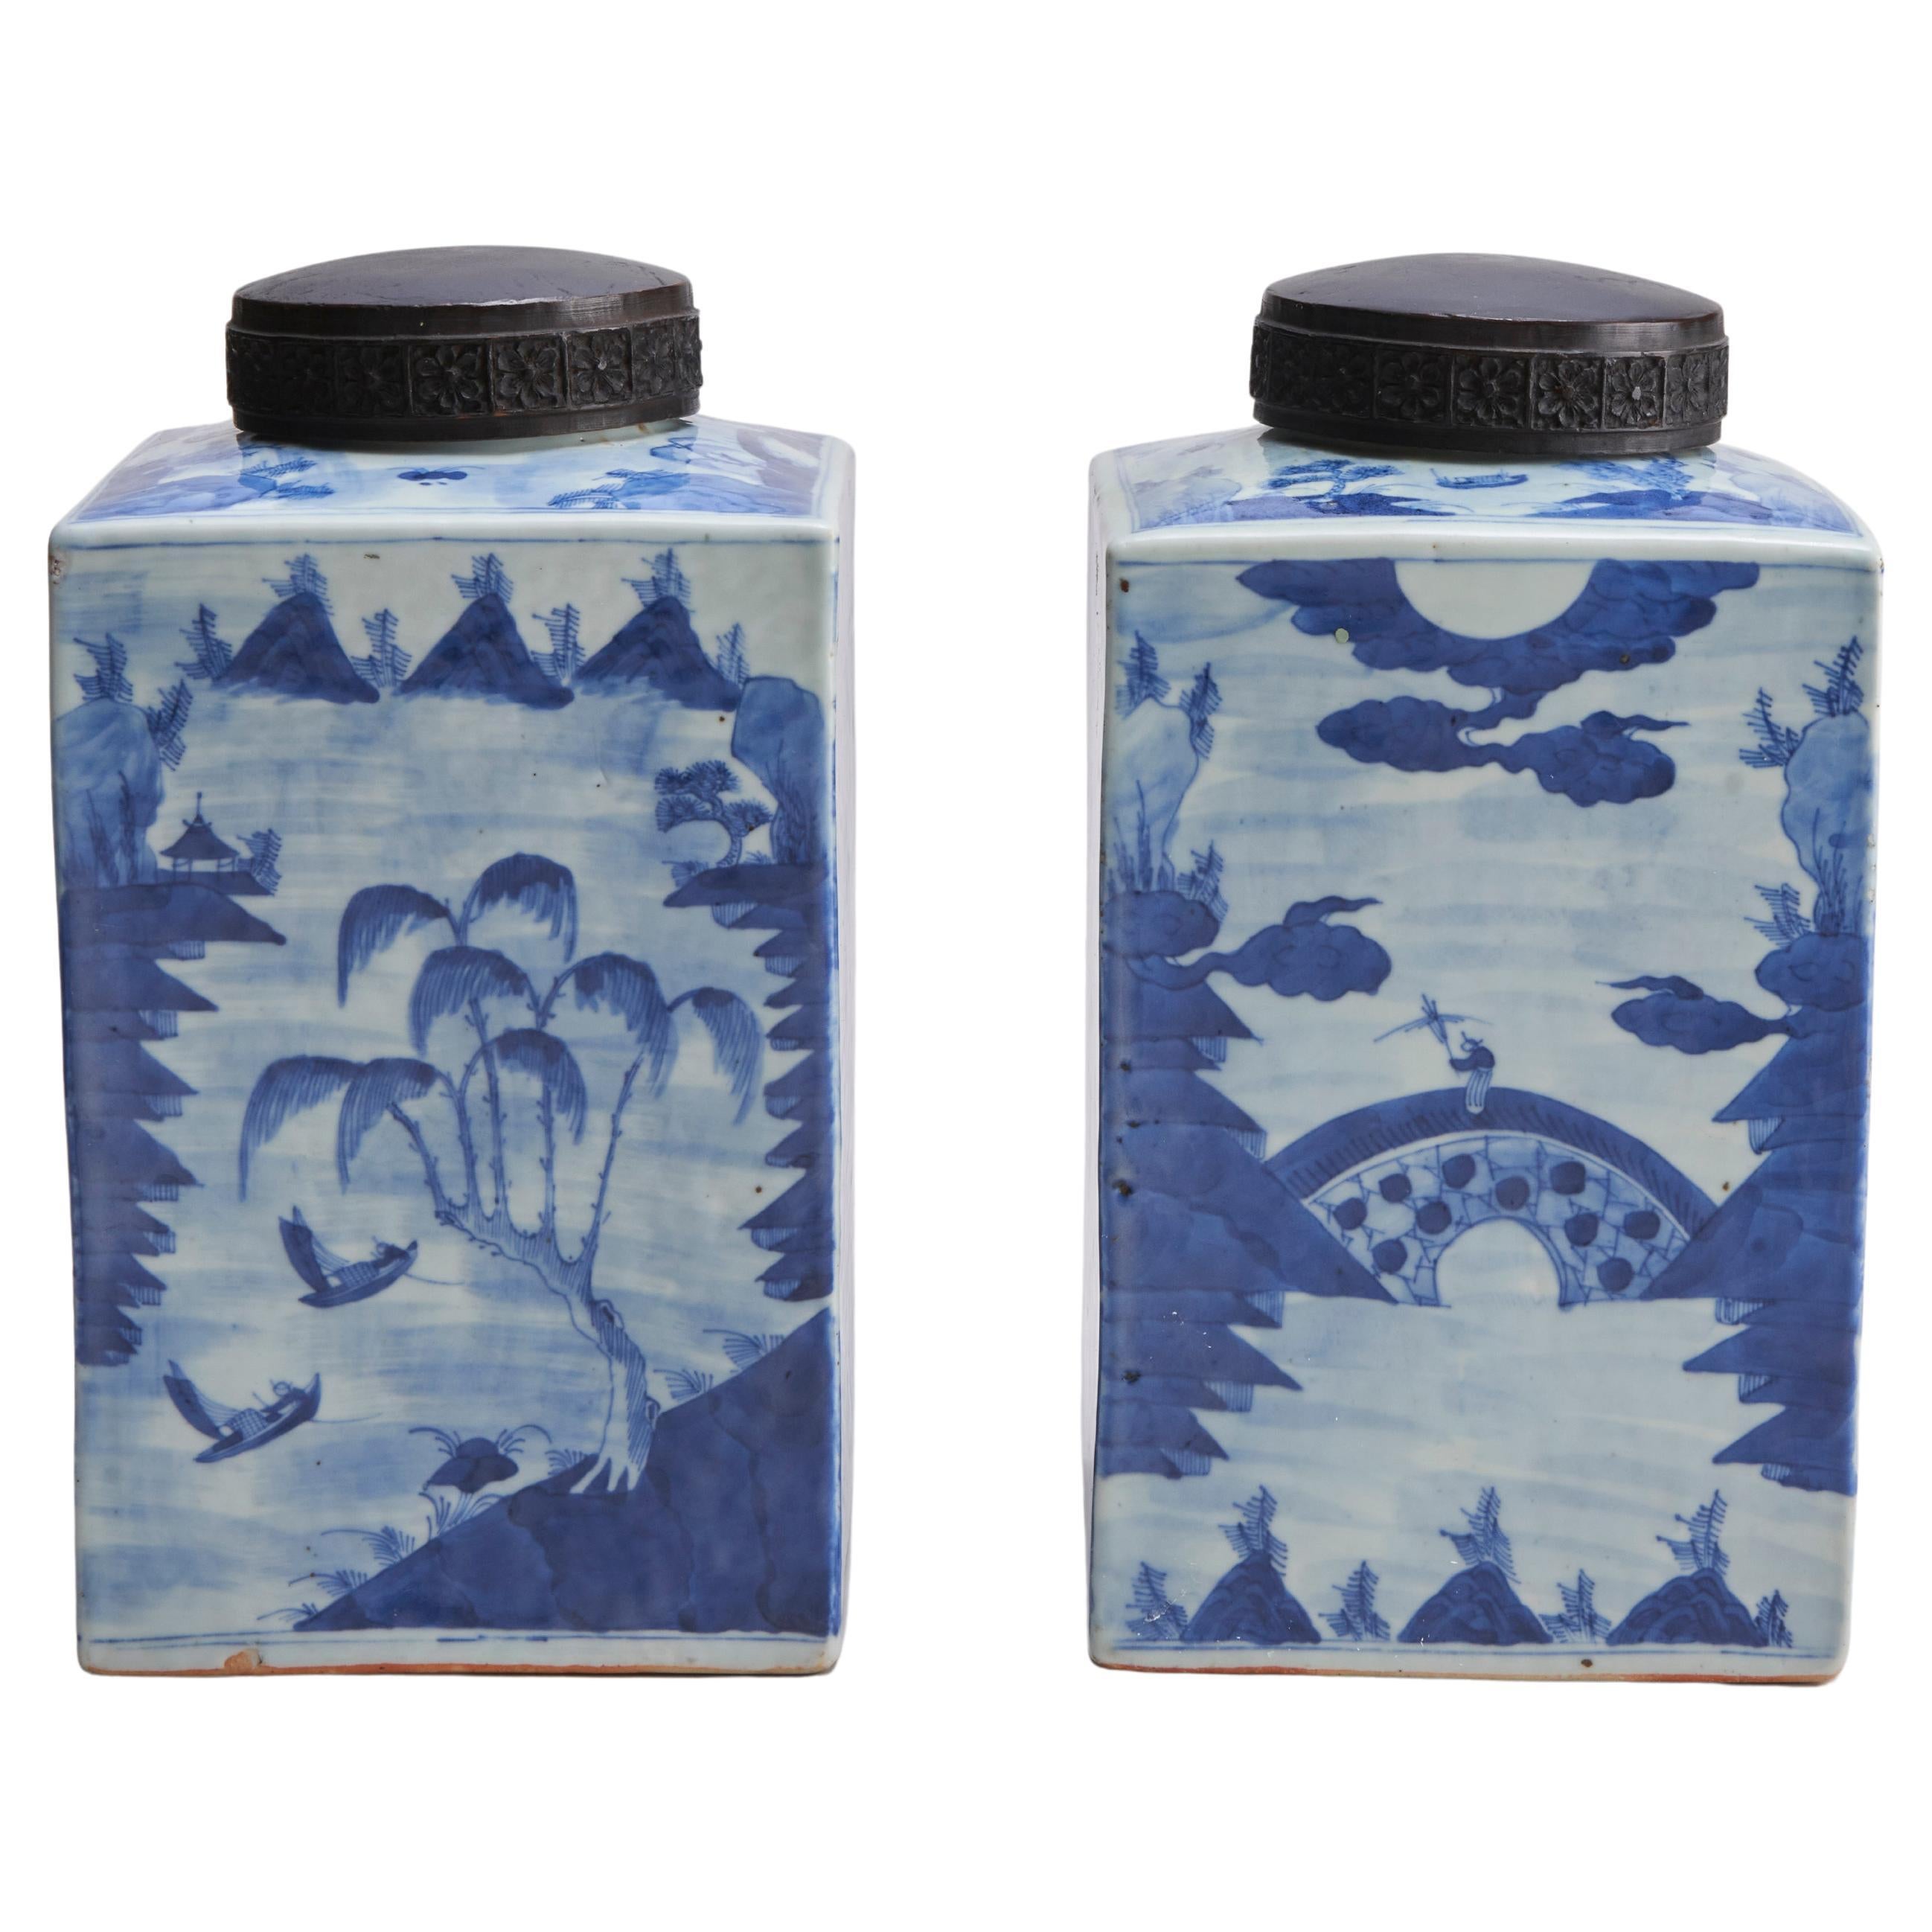 An attractive pair of Chinese porcelain blue and white tea jars (Circa 1800)